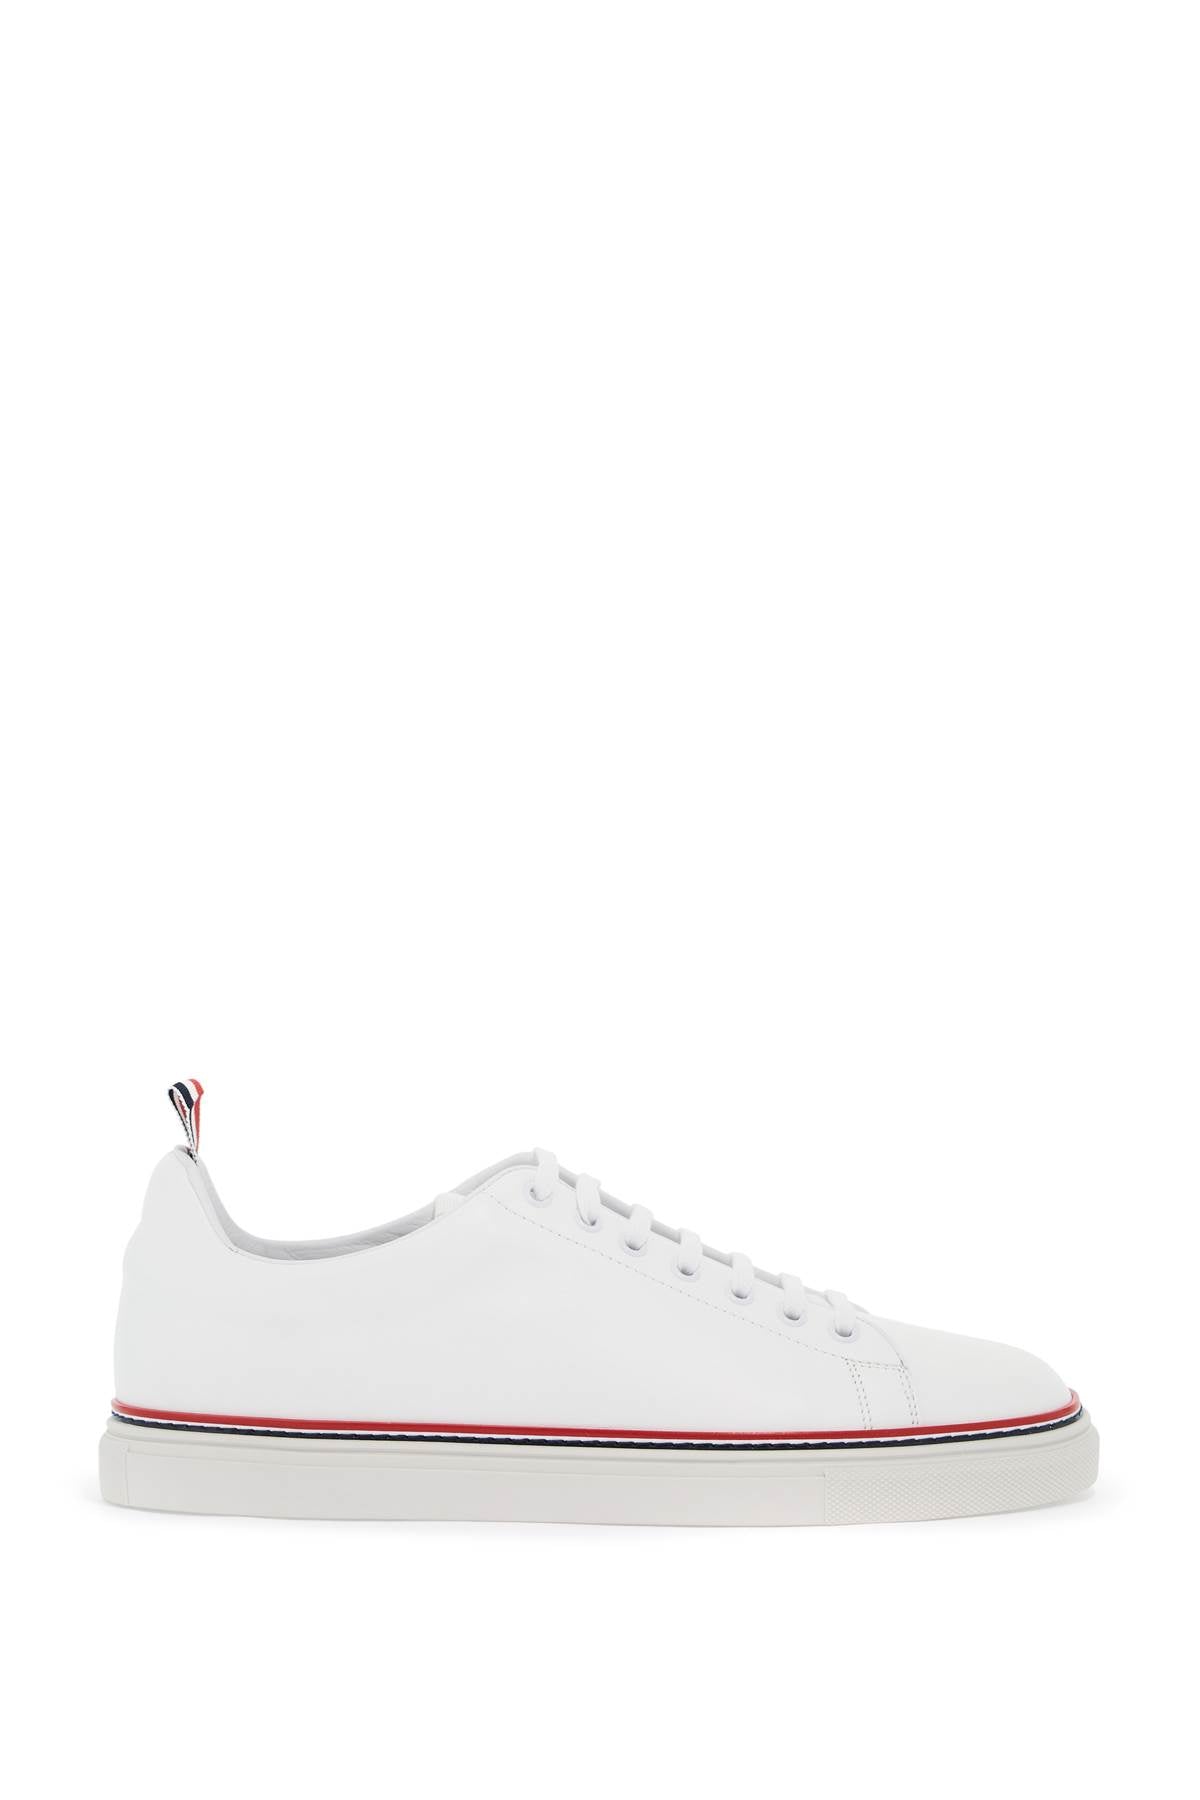 THOM BROWNE Minimal Design Leather Sneakers with Tricolor Detail for Men